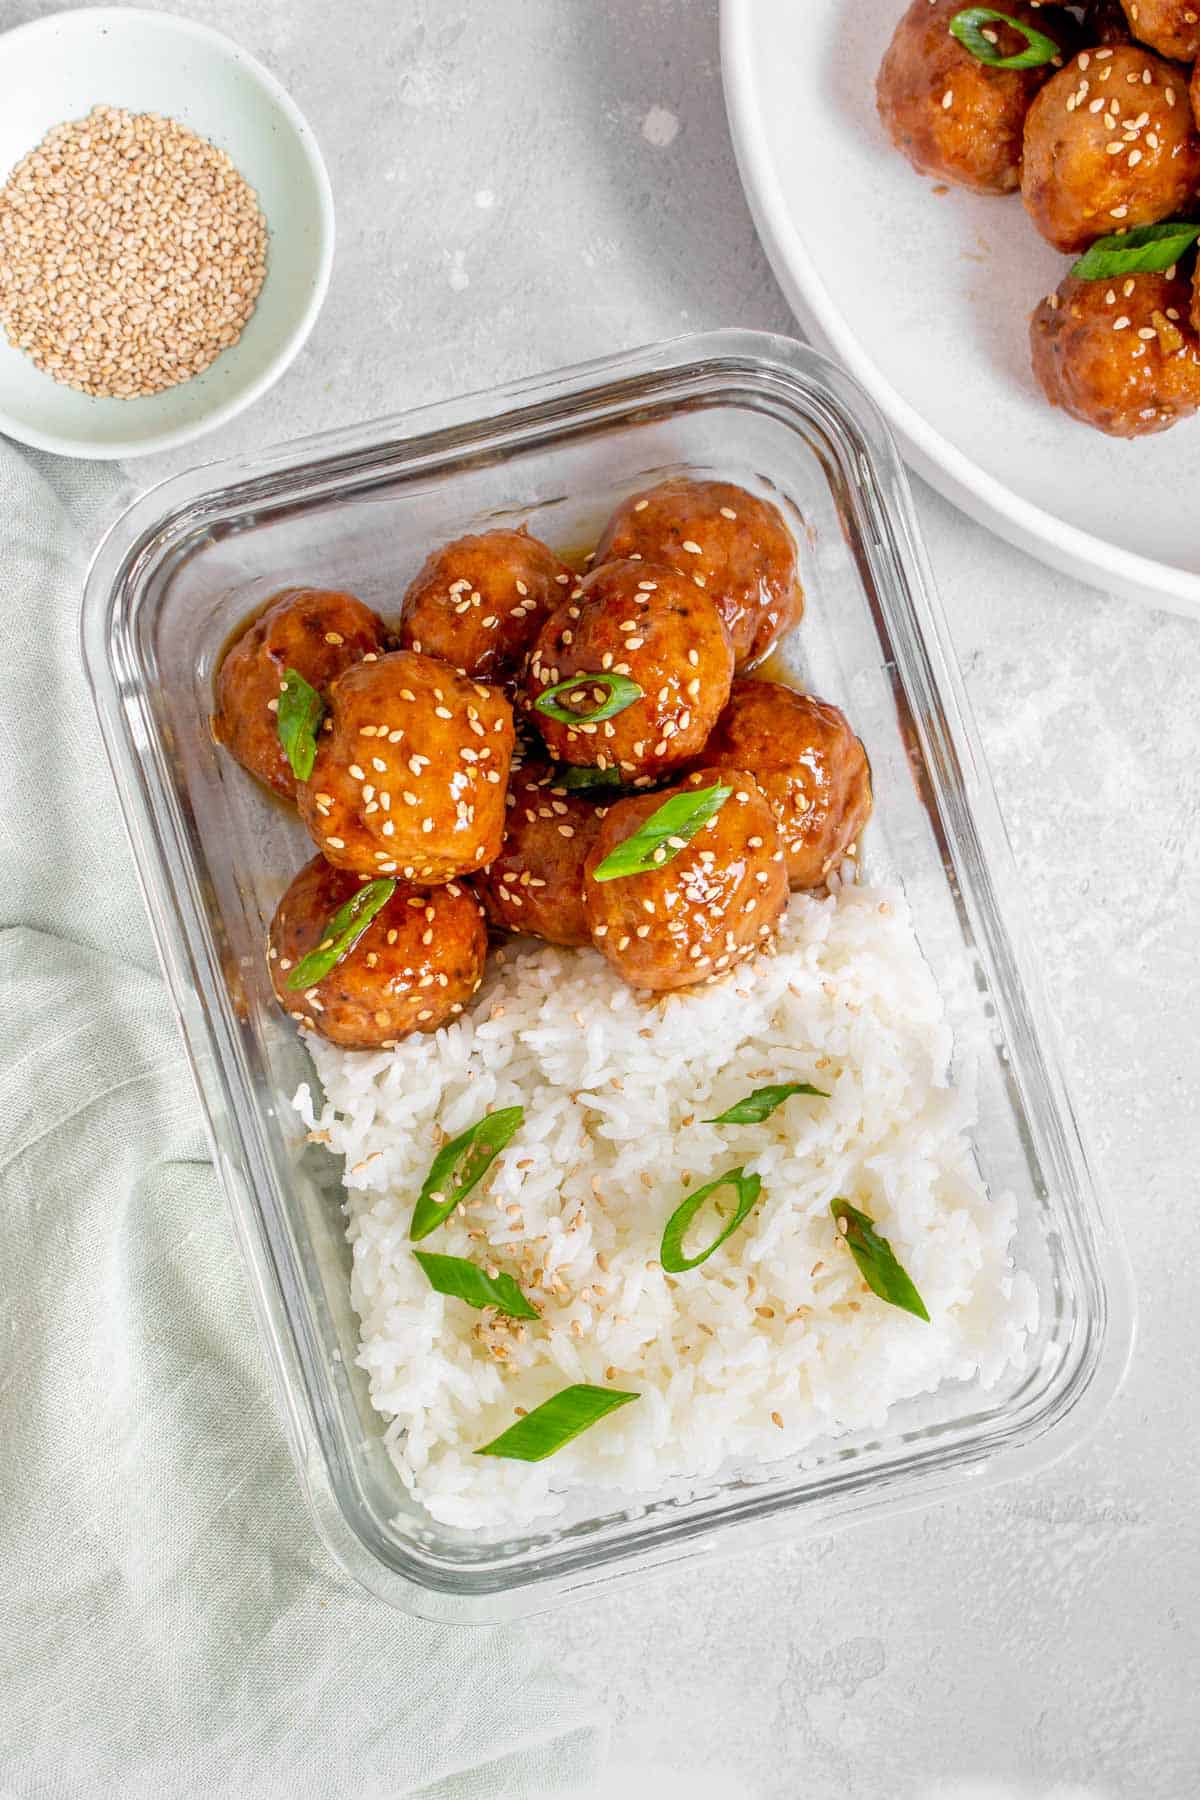 Overhead view of a meal prep container with rice and teriyaki turkey meatballs,